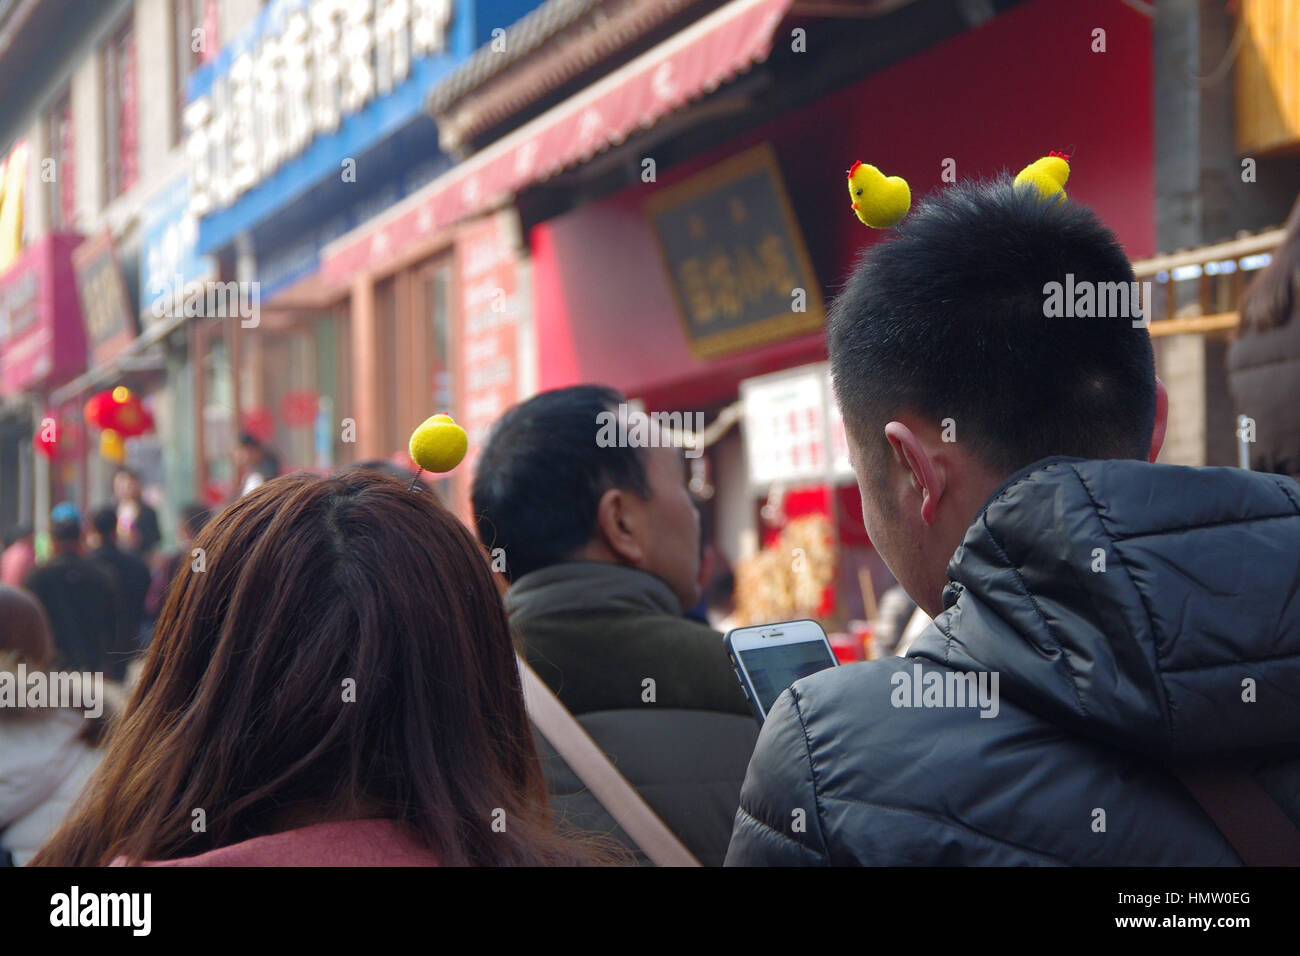 February 3, 2017 - Xi'An, Xi'an, China - Xi'an, CHINA-February 3 2017: (EDITORIAL USE ONLY. CHINA OUT) Tourists wearing little yellow chicken shaped decorations on head in Xi'an, capital of northwest China's Shaanxi Province, February 3rd, 2017. As the Year of the Rooster comes, little yellow chicken shaped decorations are becoming popular among tourists. Credit: SIPA Asia/ZUMA Wire/Alamy Live News Stock Photo